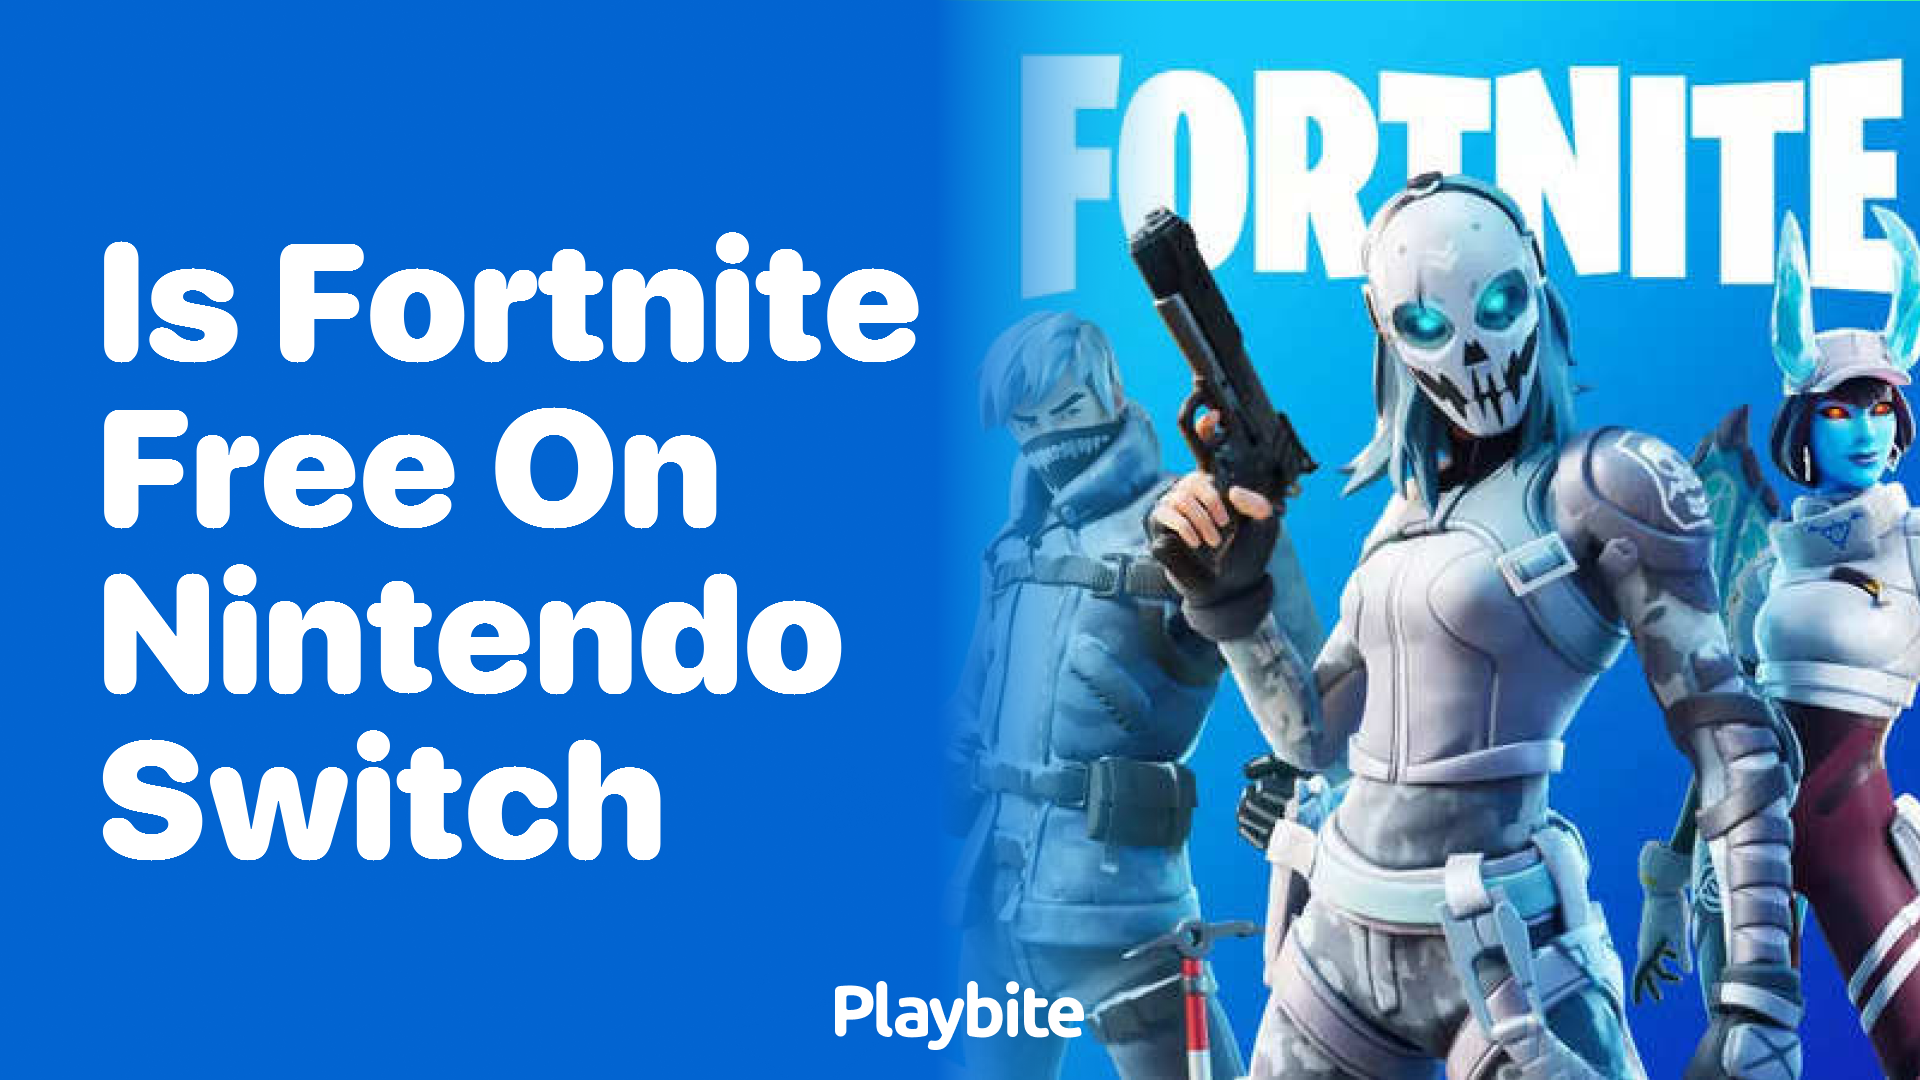 Is Fortnite Free on Nintendo Switch?